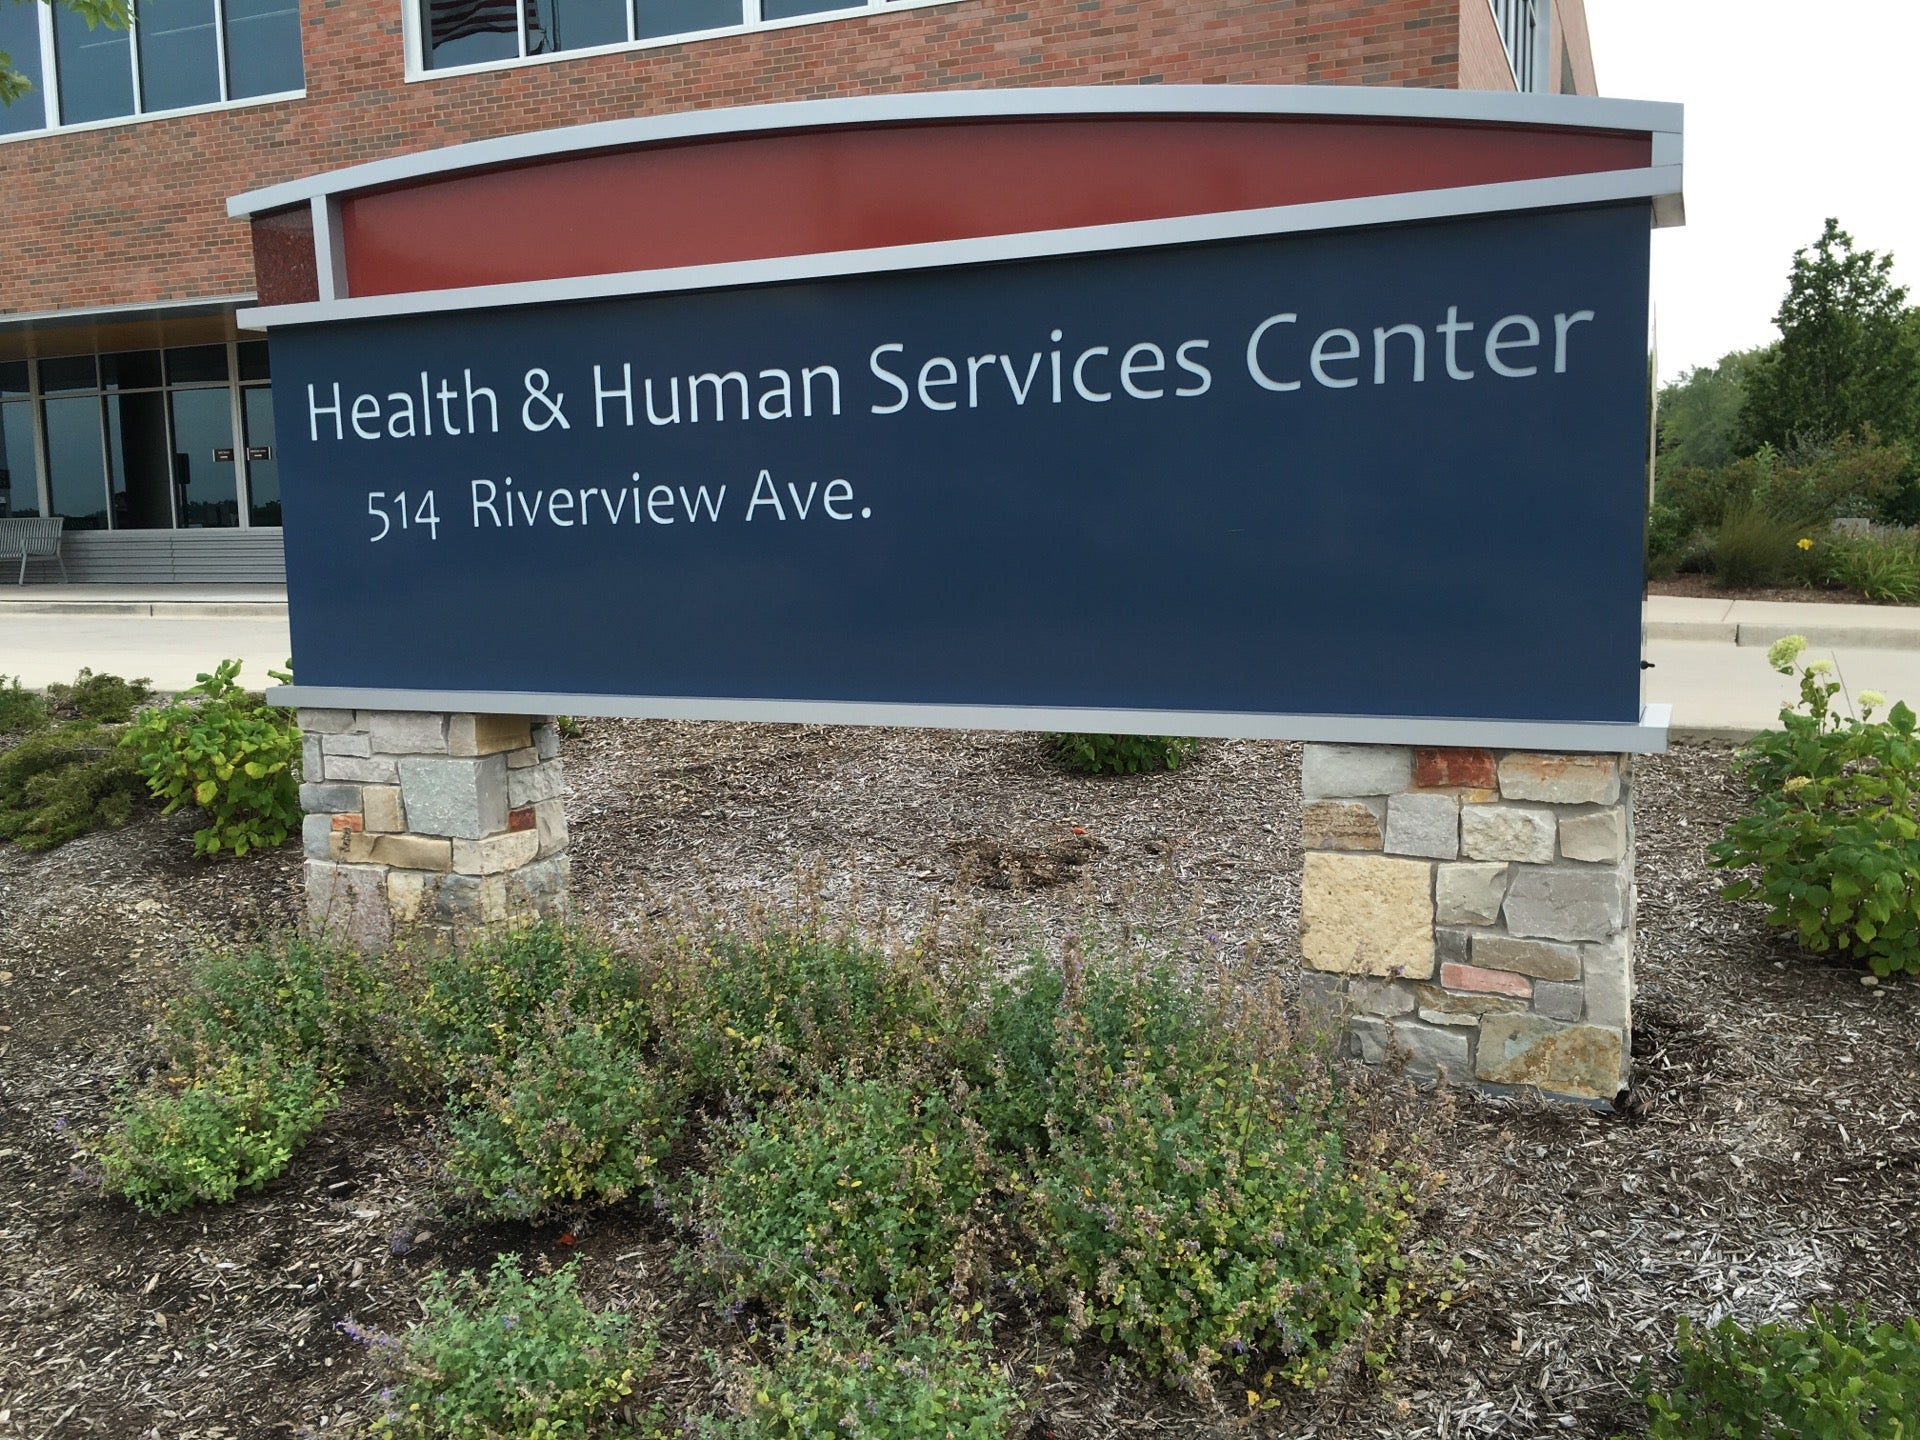 Waukesha County Outpatient Services